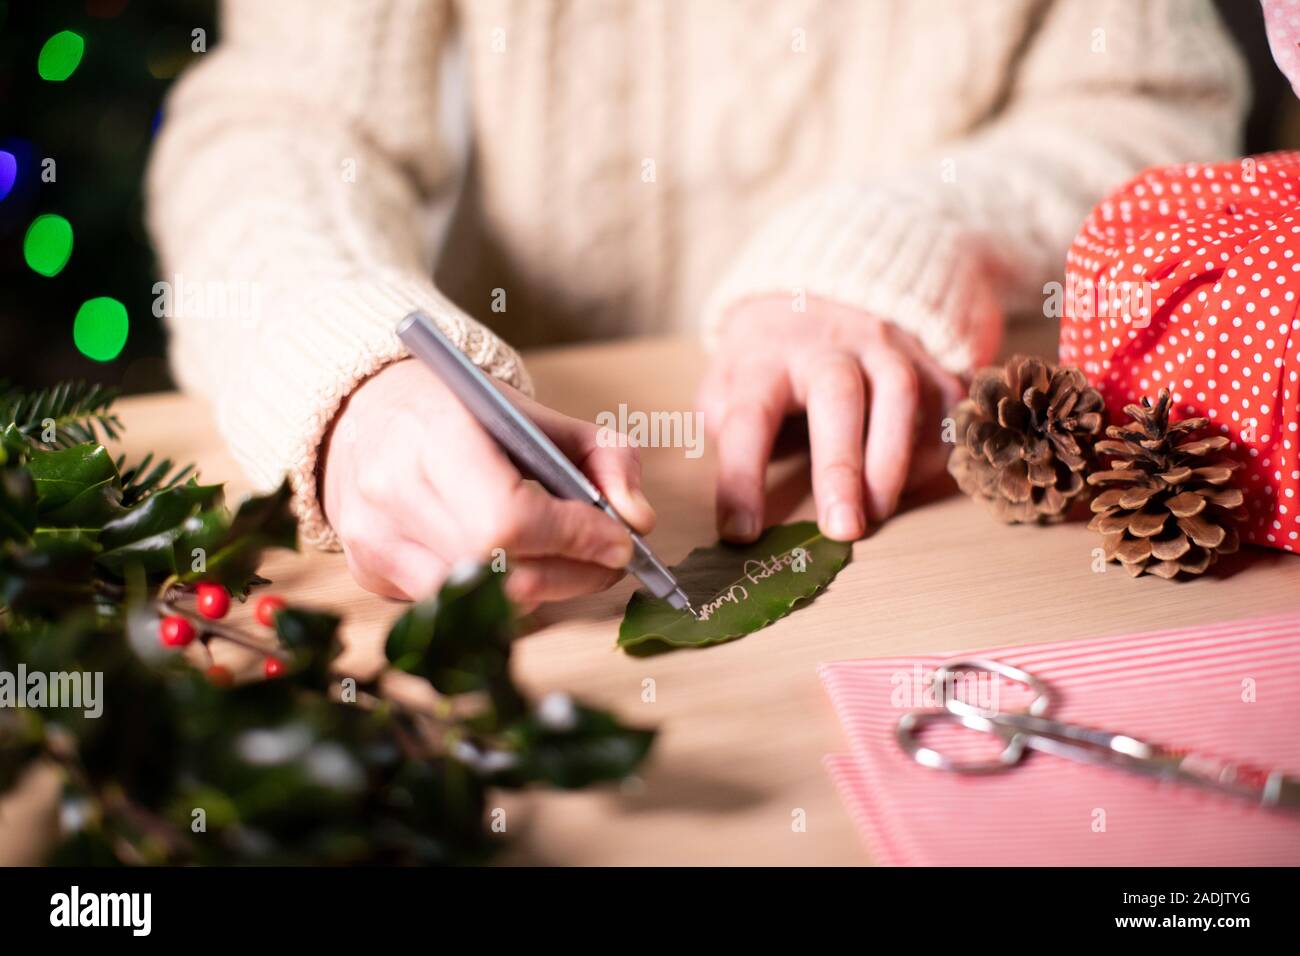 Woman Writing On Gift Tag Made From Bay Leaf For Eco Friendly Christmas Gift Stock Photo